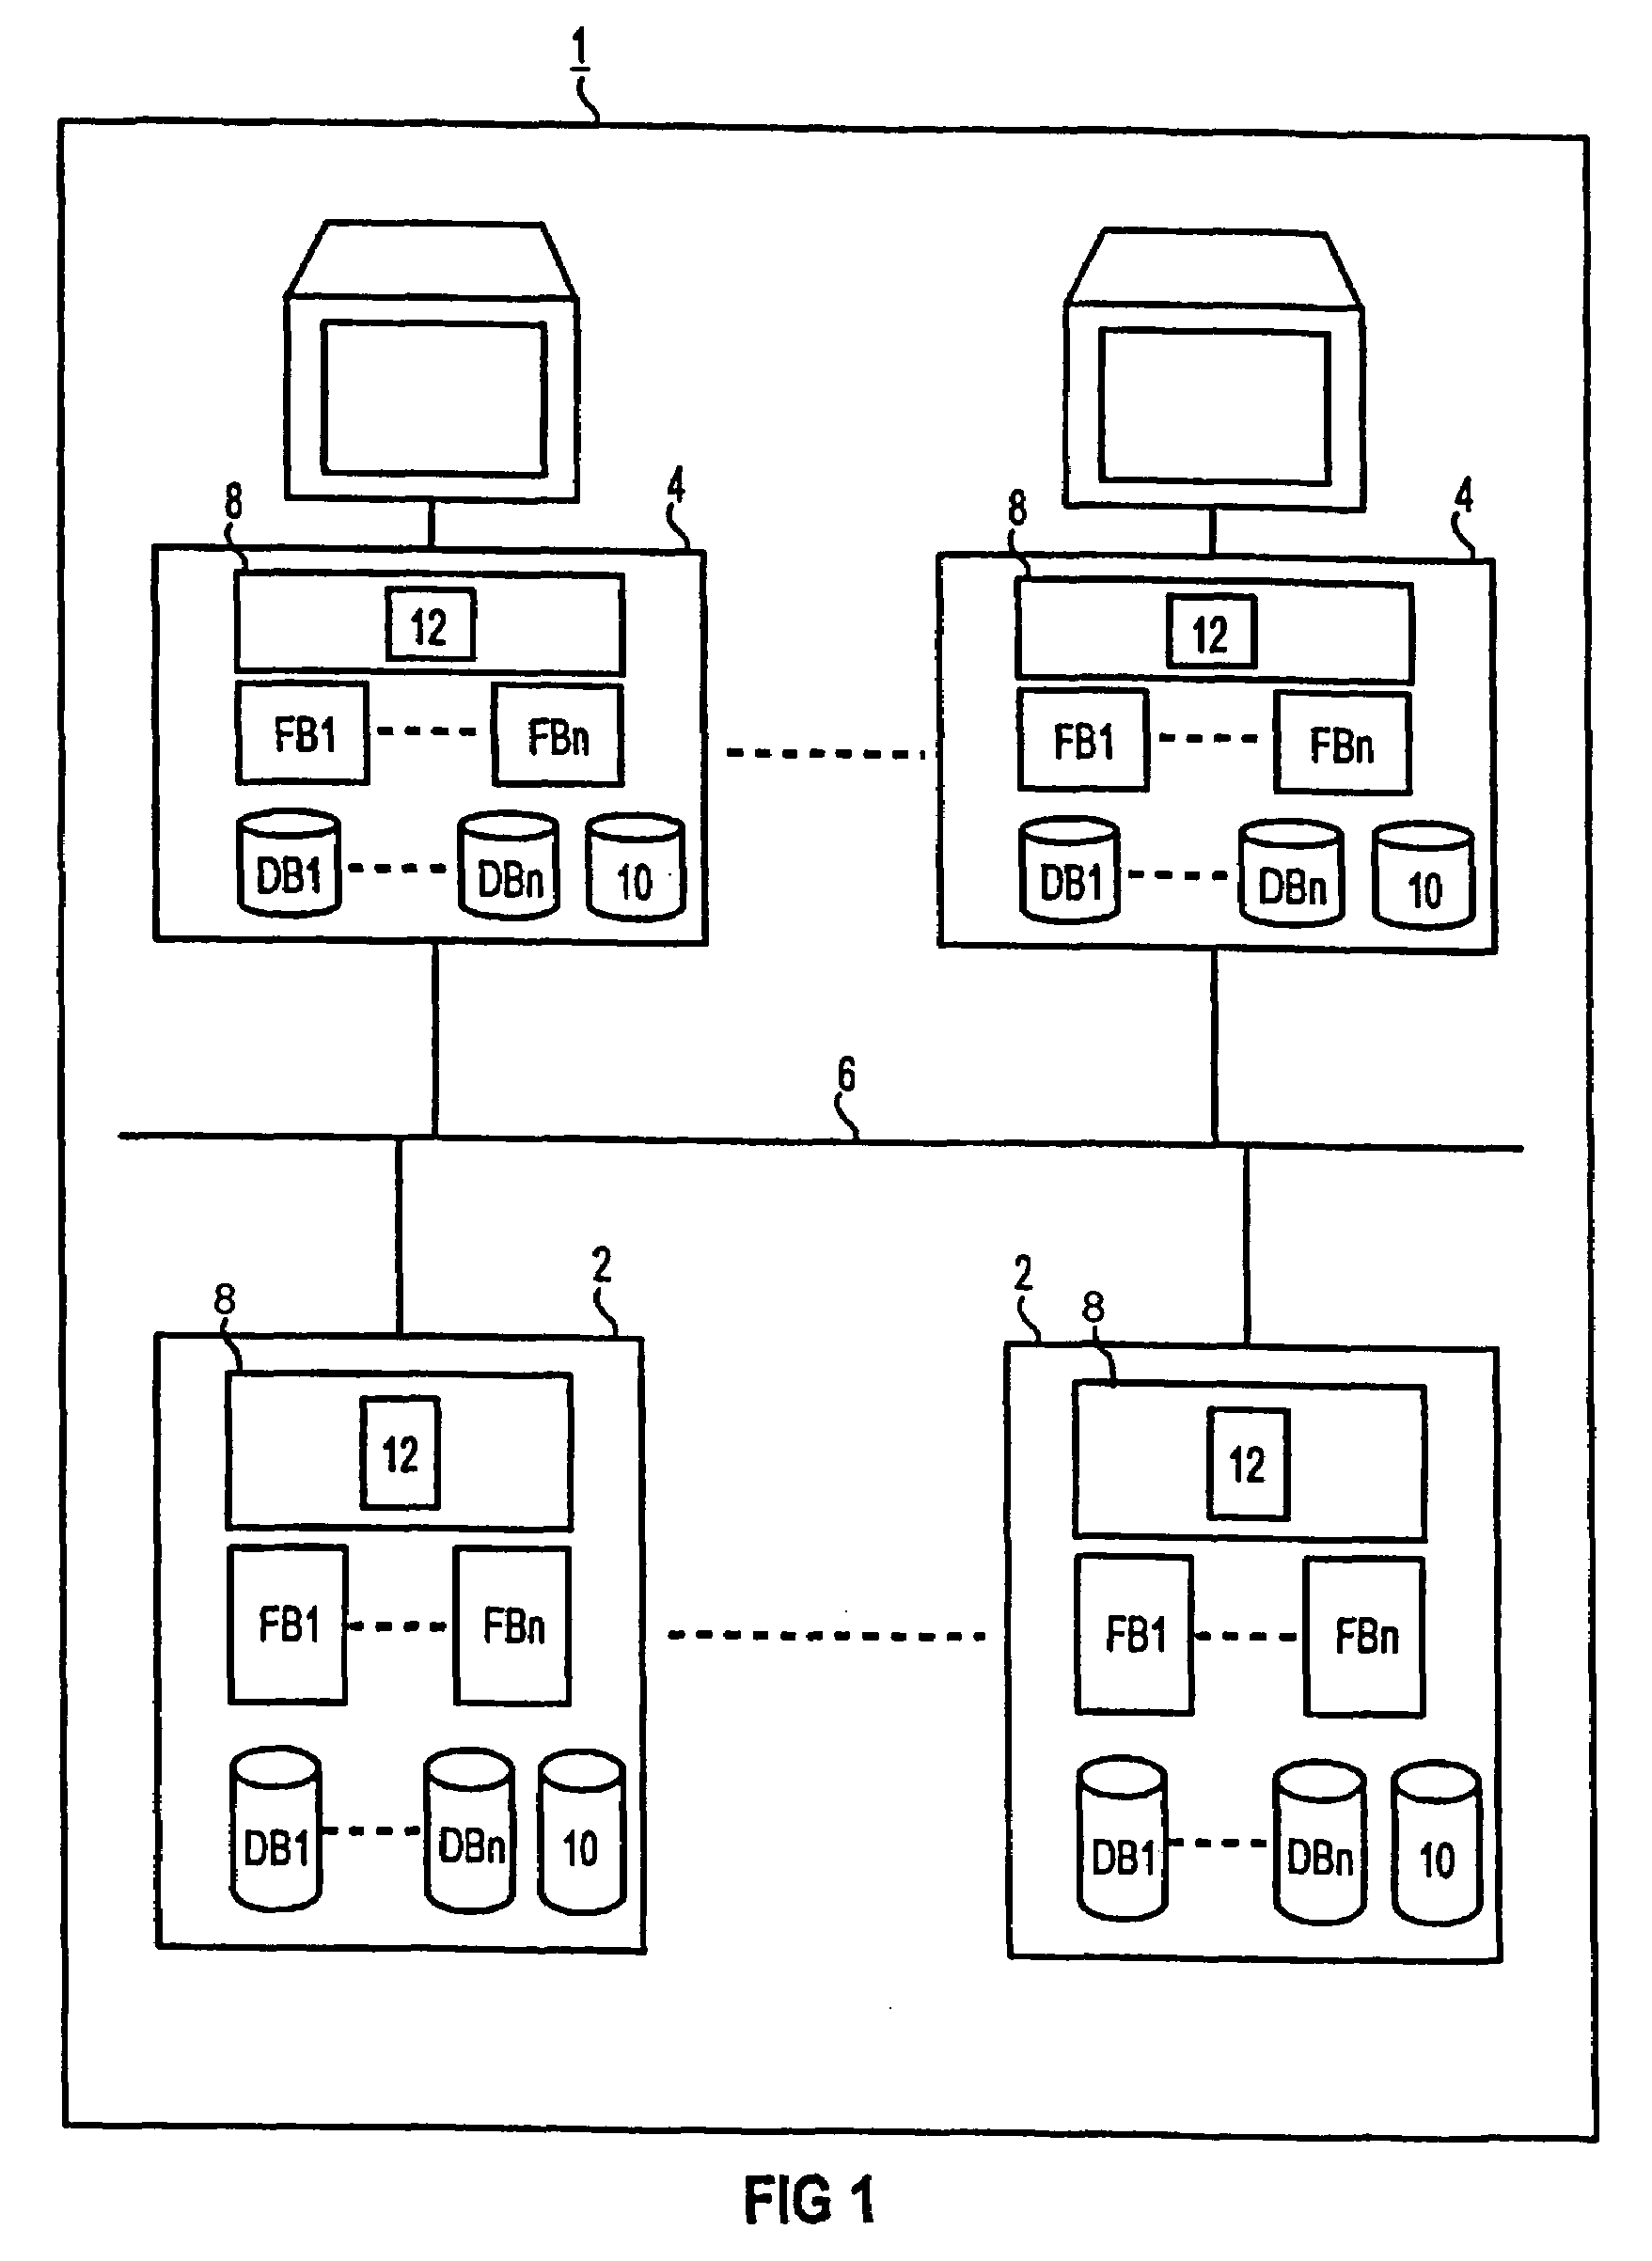 Method for processing data using external and internal identifiers to provide reliable access to the data even when reconfigurations of the data occur, and associated system